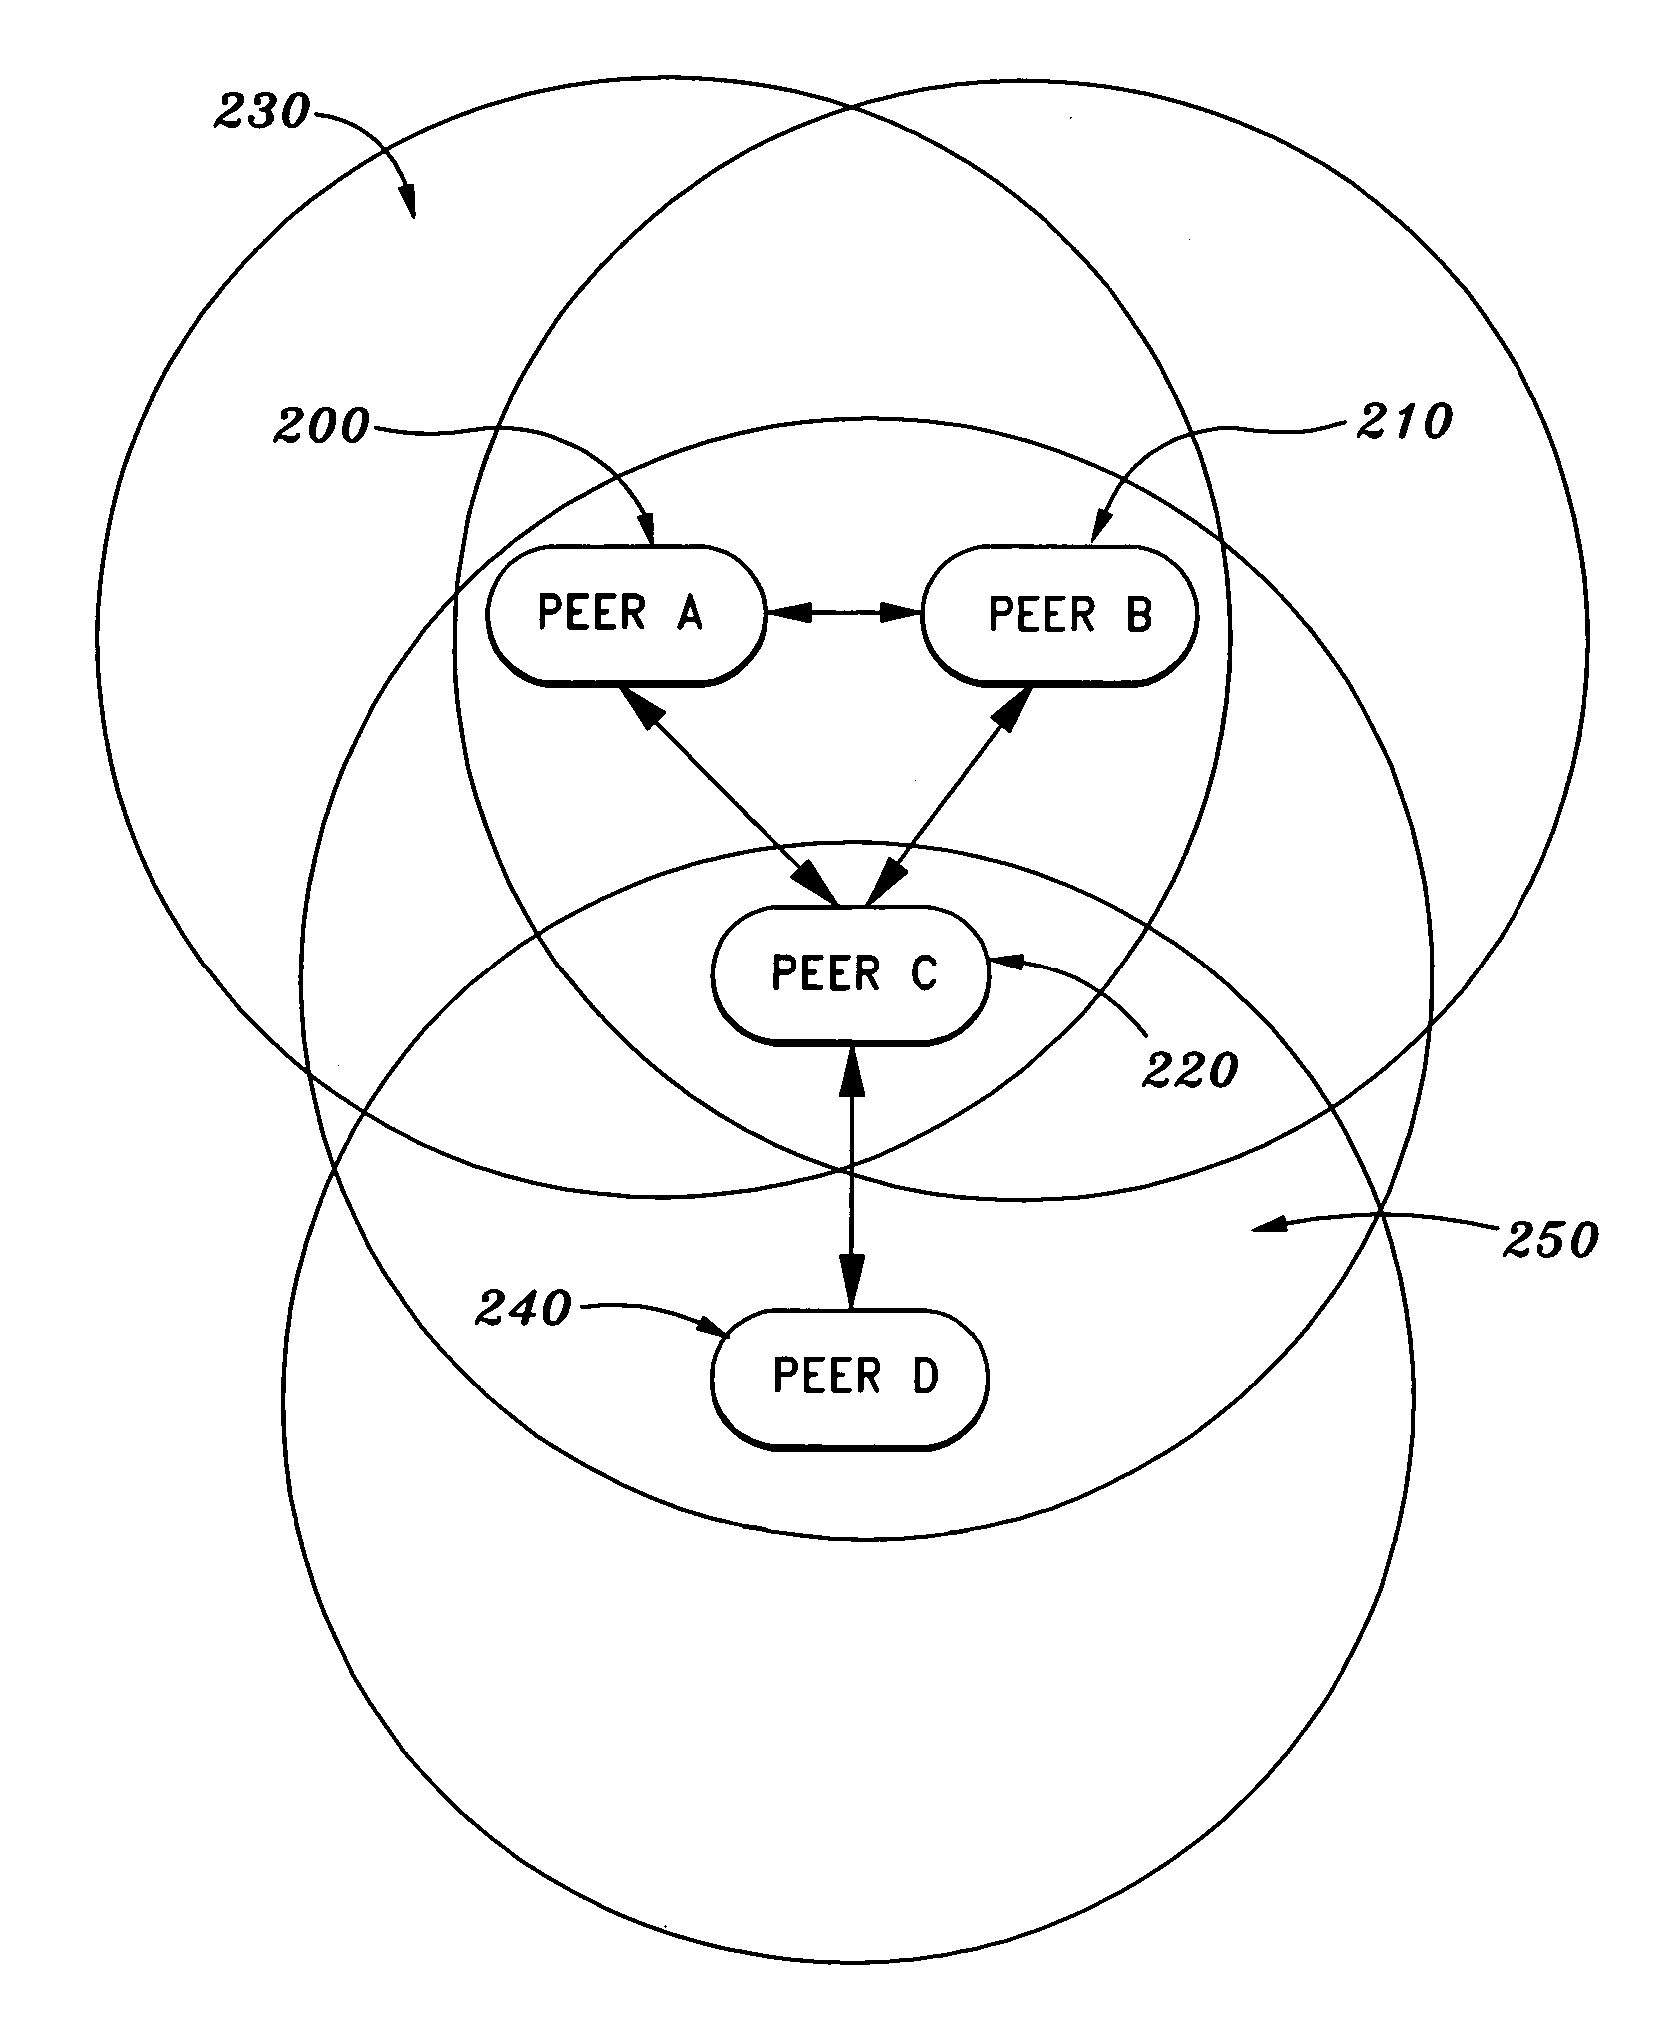 Method and system for peer-to-peer wireless communication over unlicensed communication spectrum